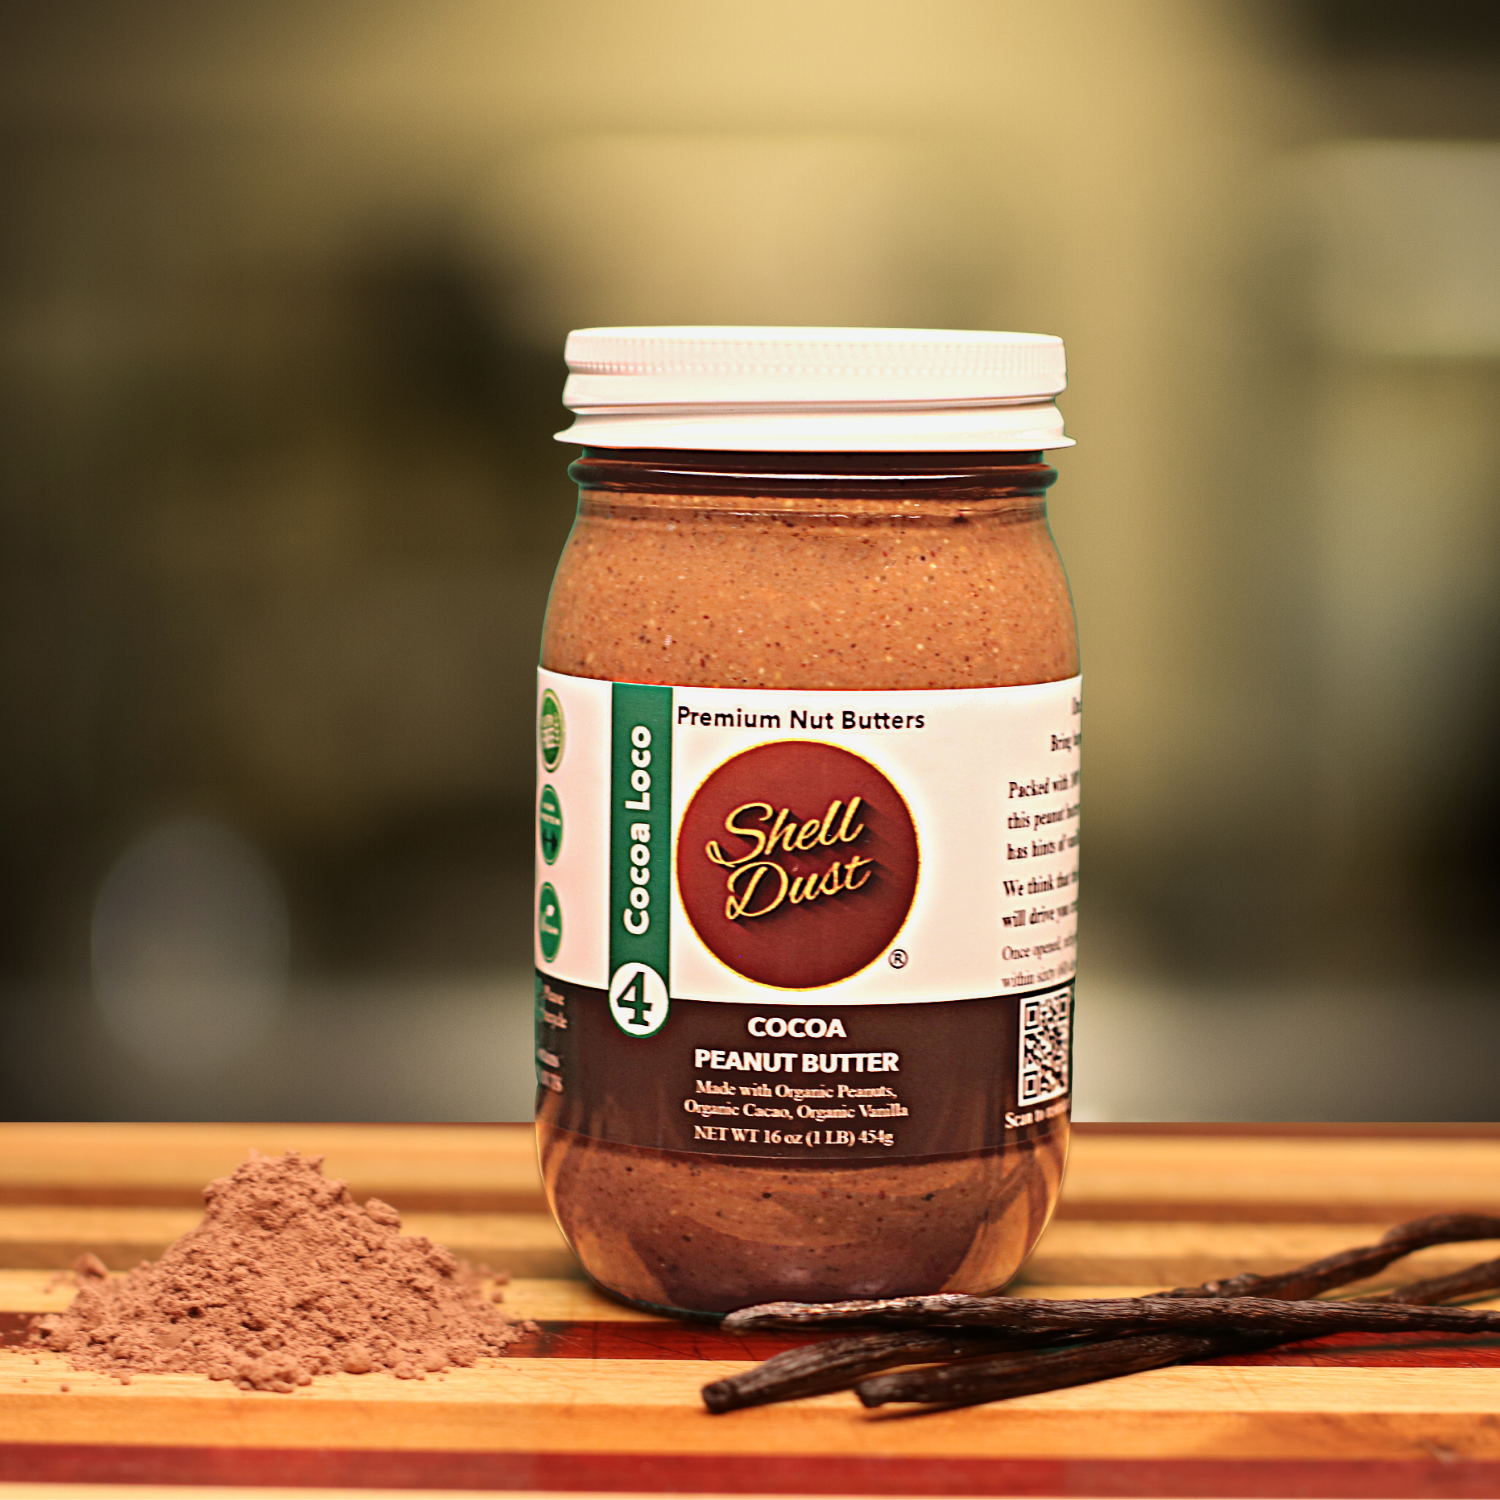 8oz Chocolate Peanut Butter (with organic ingredients)